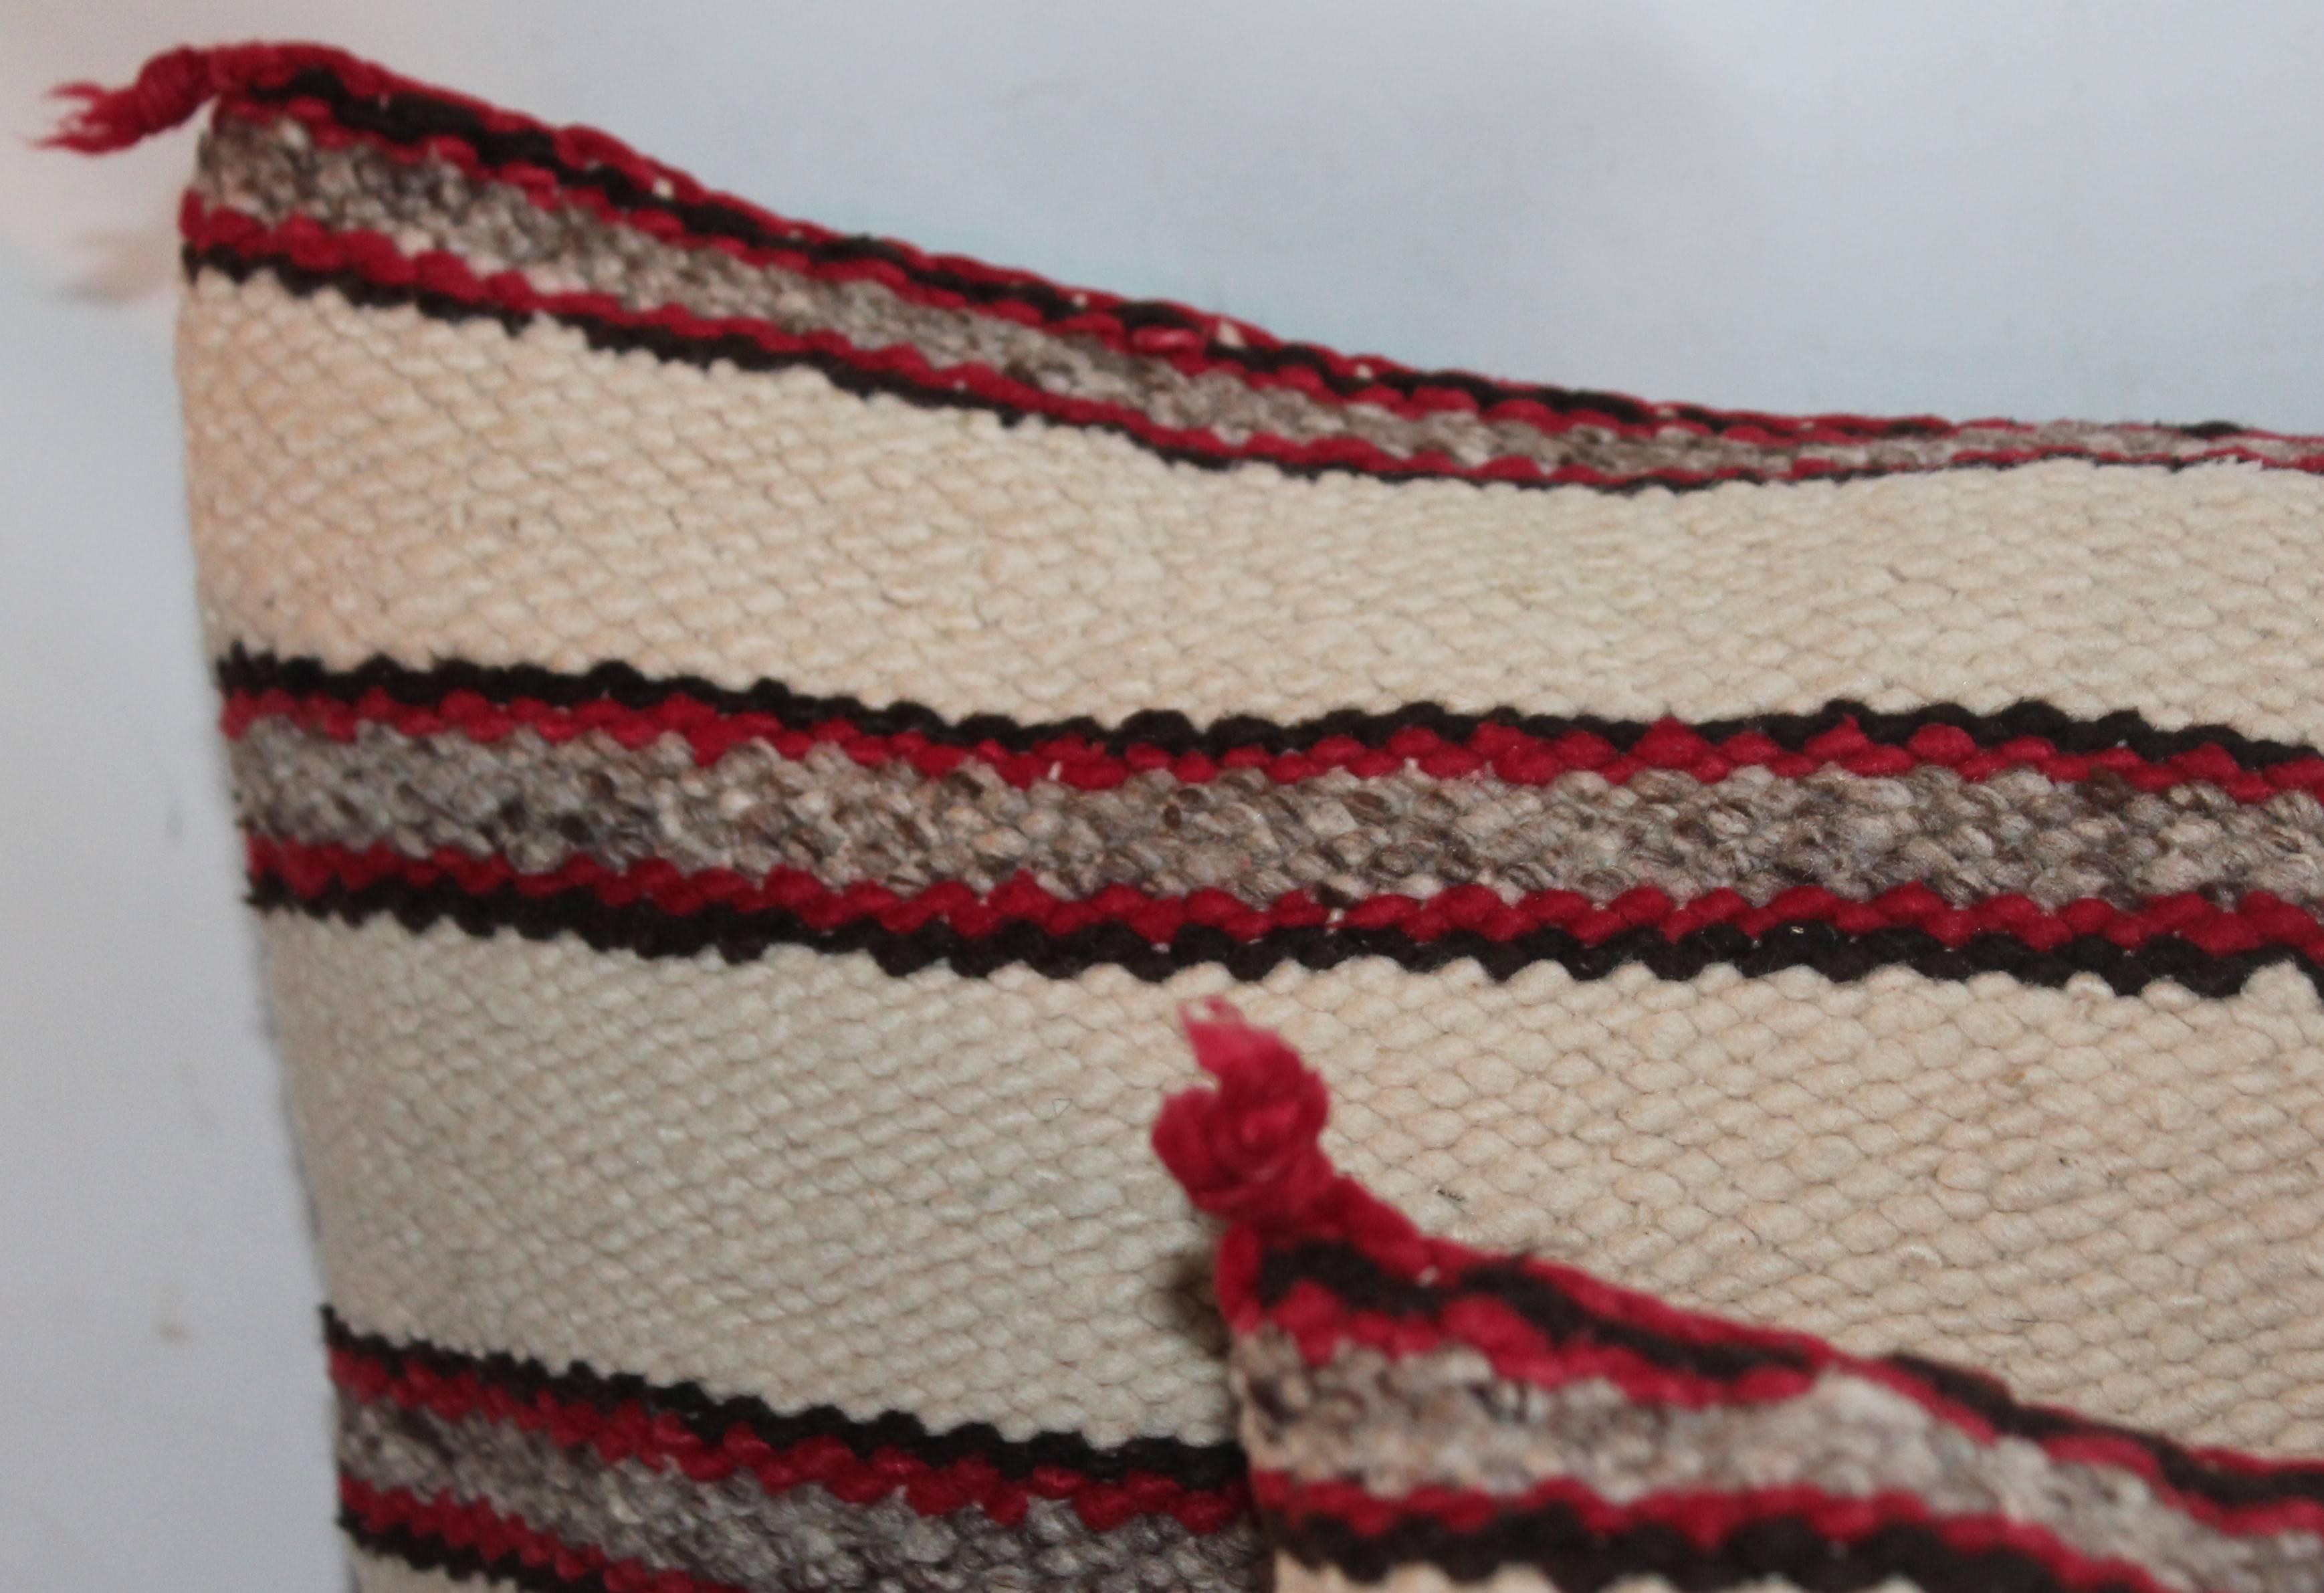 Navajo Indian weaving saddle blanket pillows in great condition. These simple stripes are quite interesting and folky. The backing is in black cotton linen.